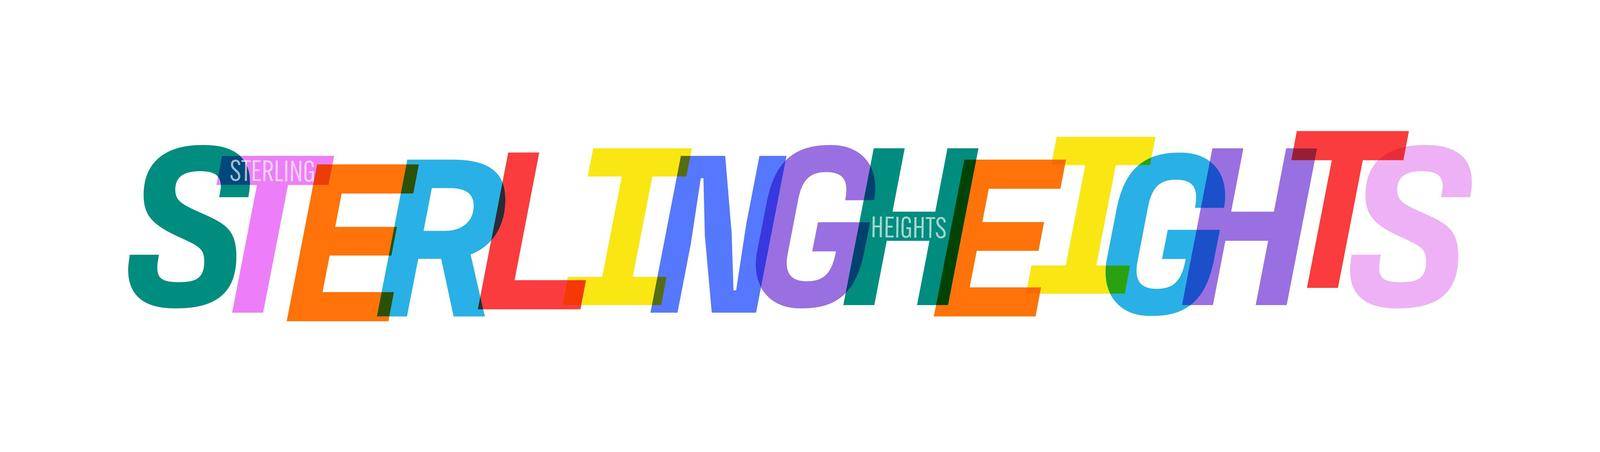 STERLING HEIGHTS. The name of the city on a white background. Vector design template for poster, postcard, banner by Grommik